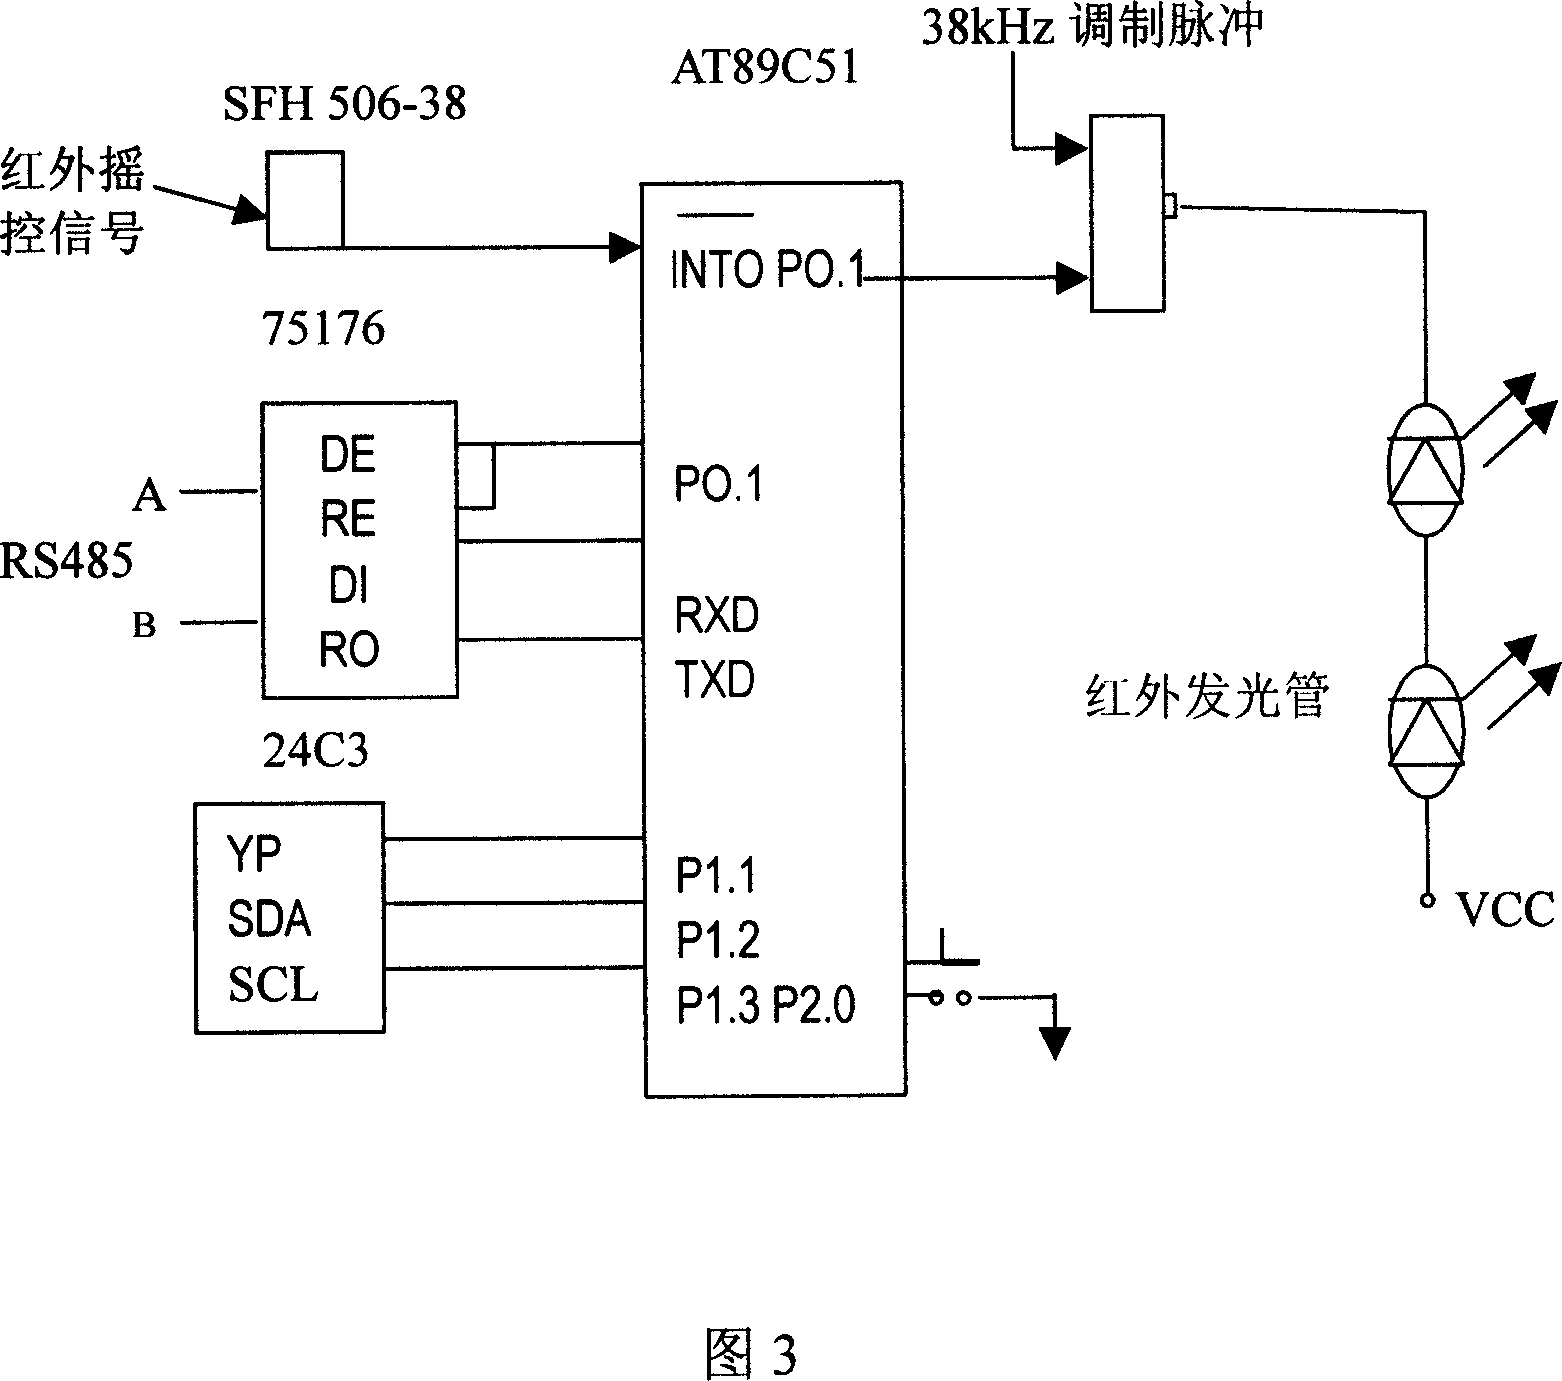 Universal studying programmable remote controller and its control method